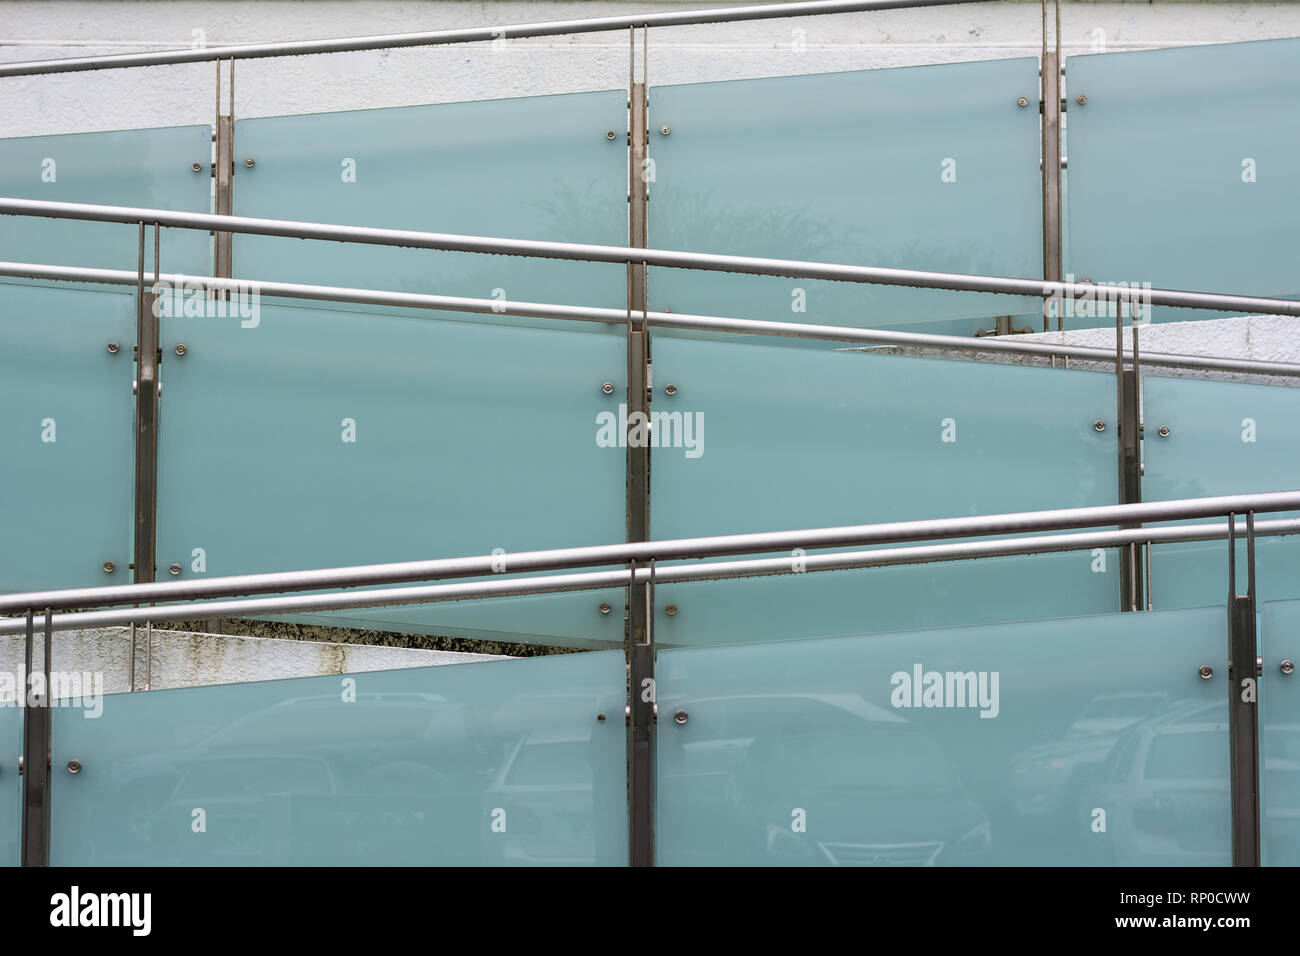 Metal railings and glass wall, Outdoor staircase Stock Photo